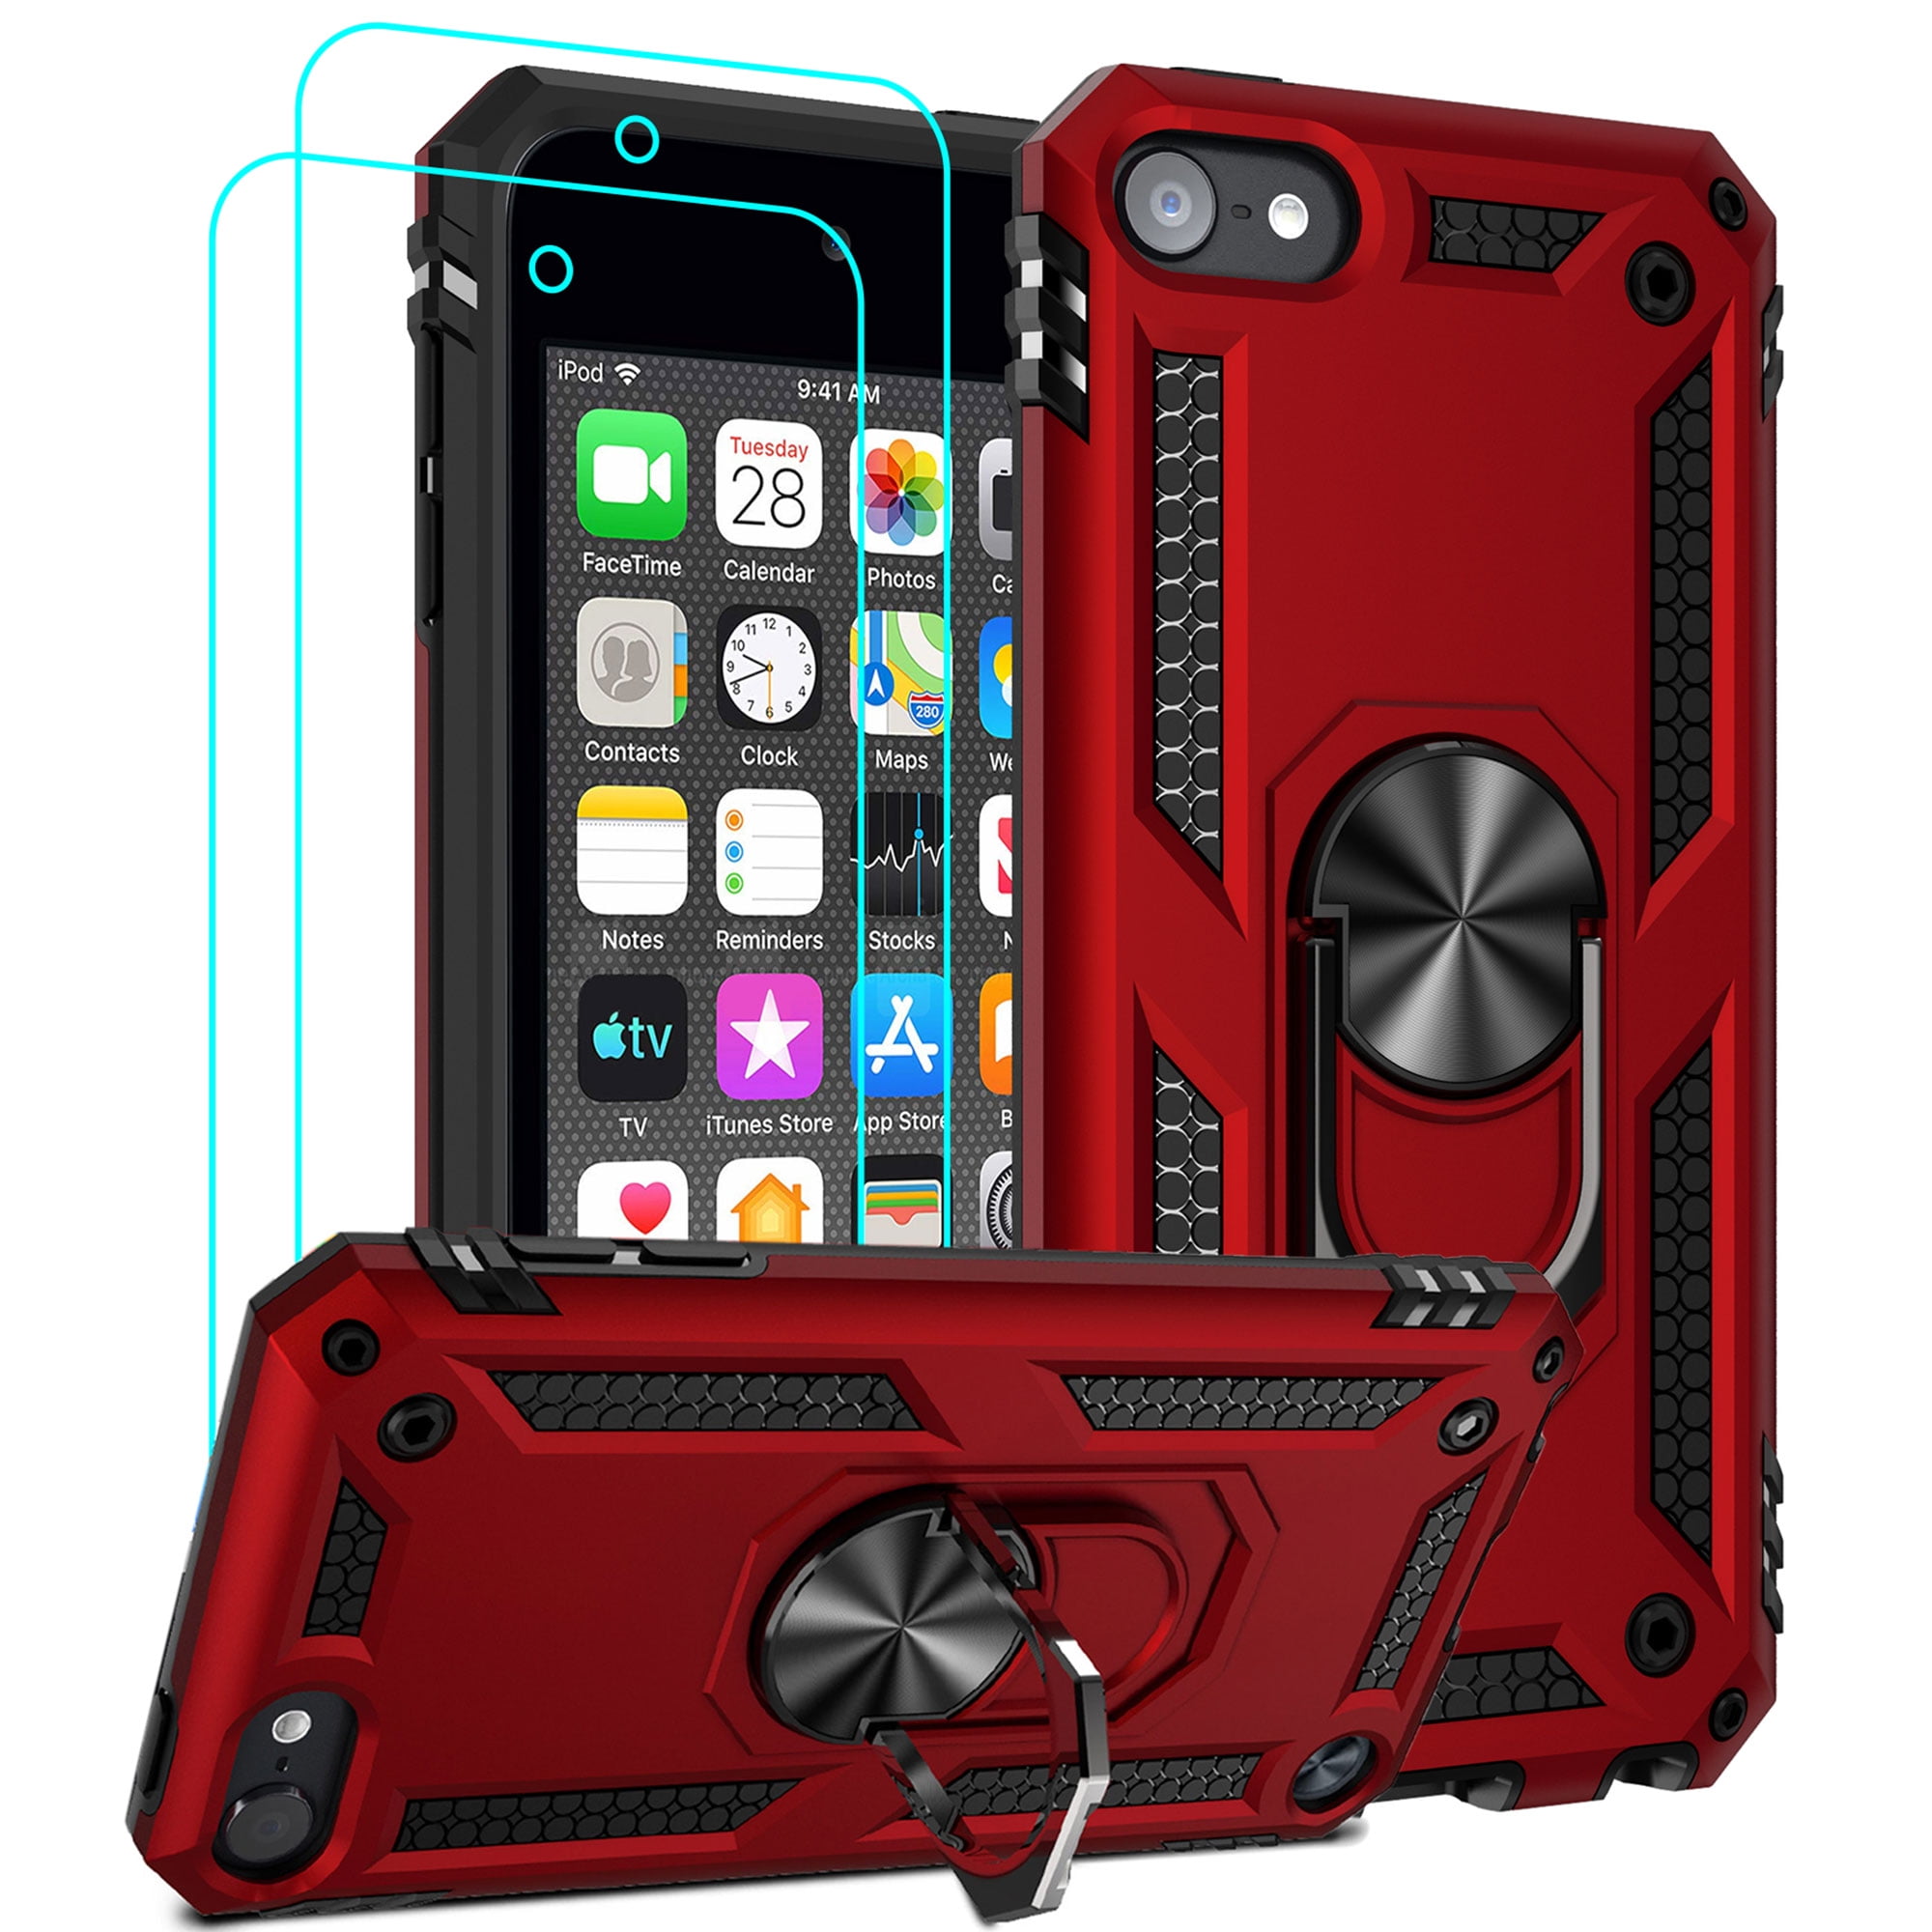 Silver iPod Touch 7 Case,iPod Touch 6 Case with Car Mount,SLMY Hybrid Rugged Shockproof Cover with Built-in Kickstand for Apple iPod Touch 5 6 7th Generation 